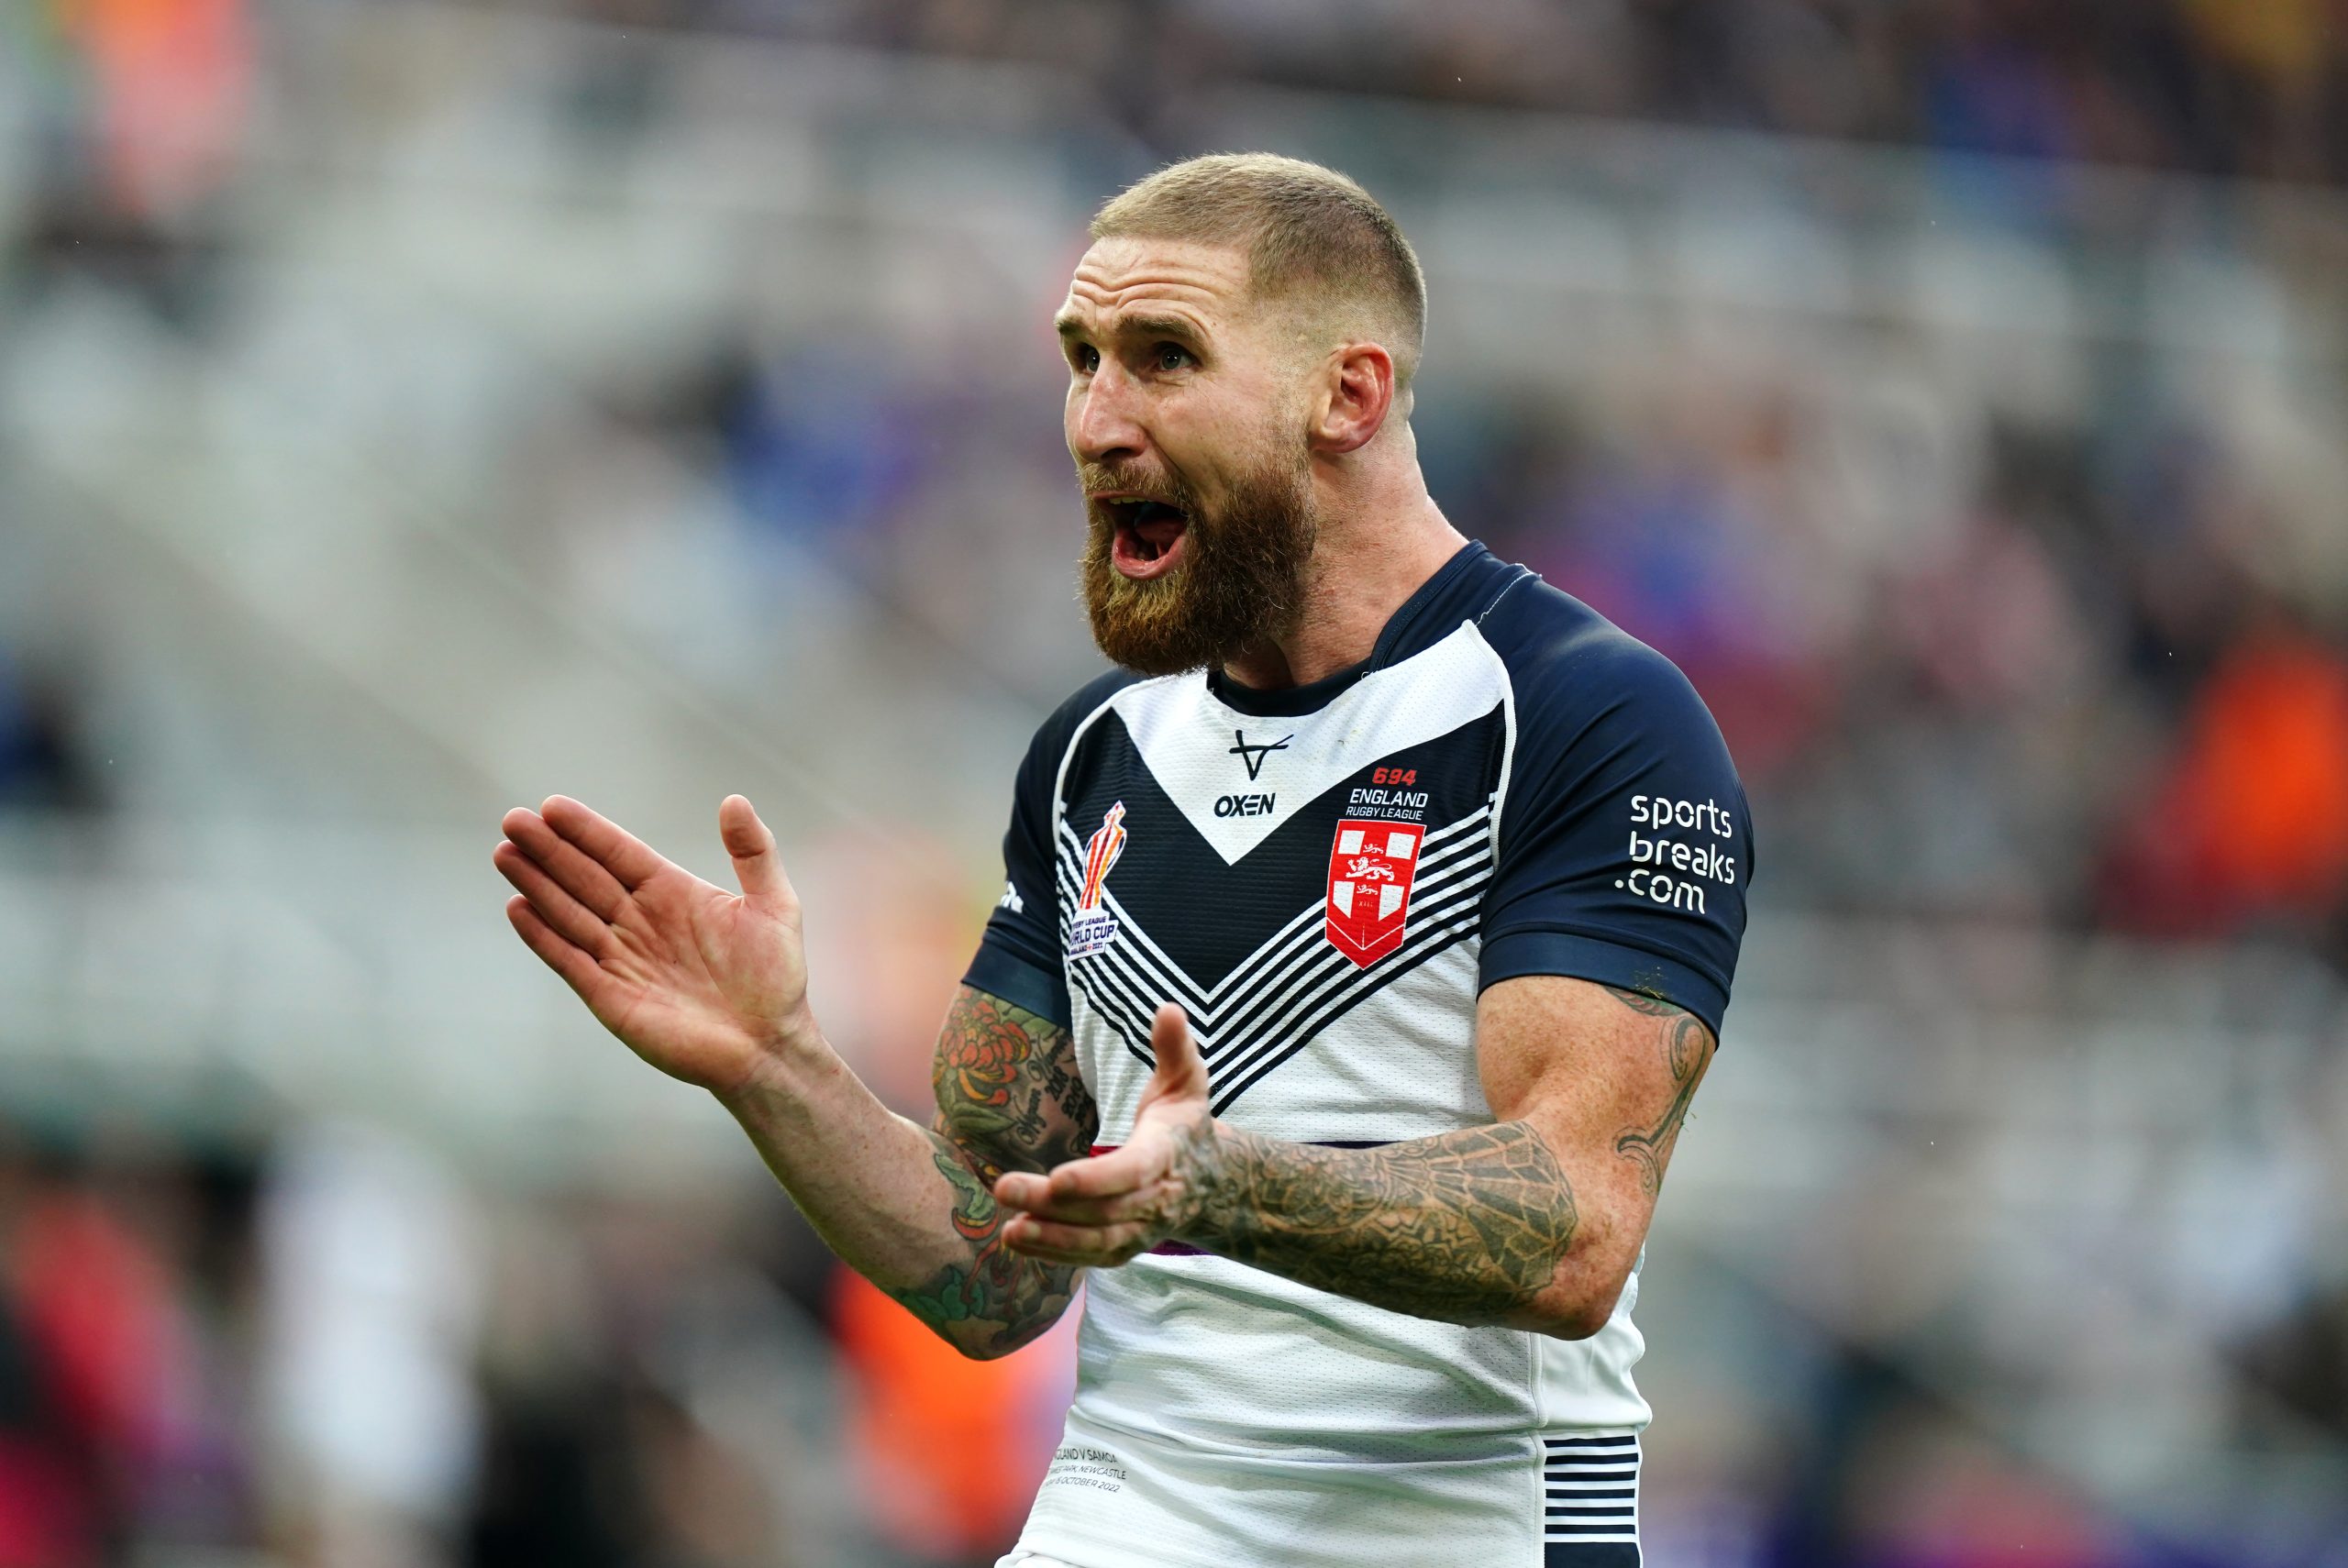 Sam Tomkins retiring from rugby league at the end of the season